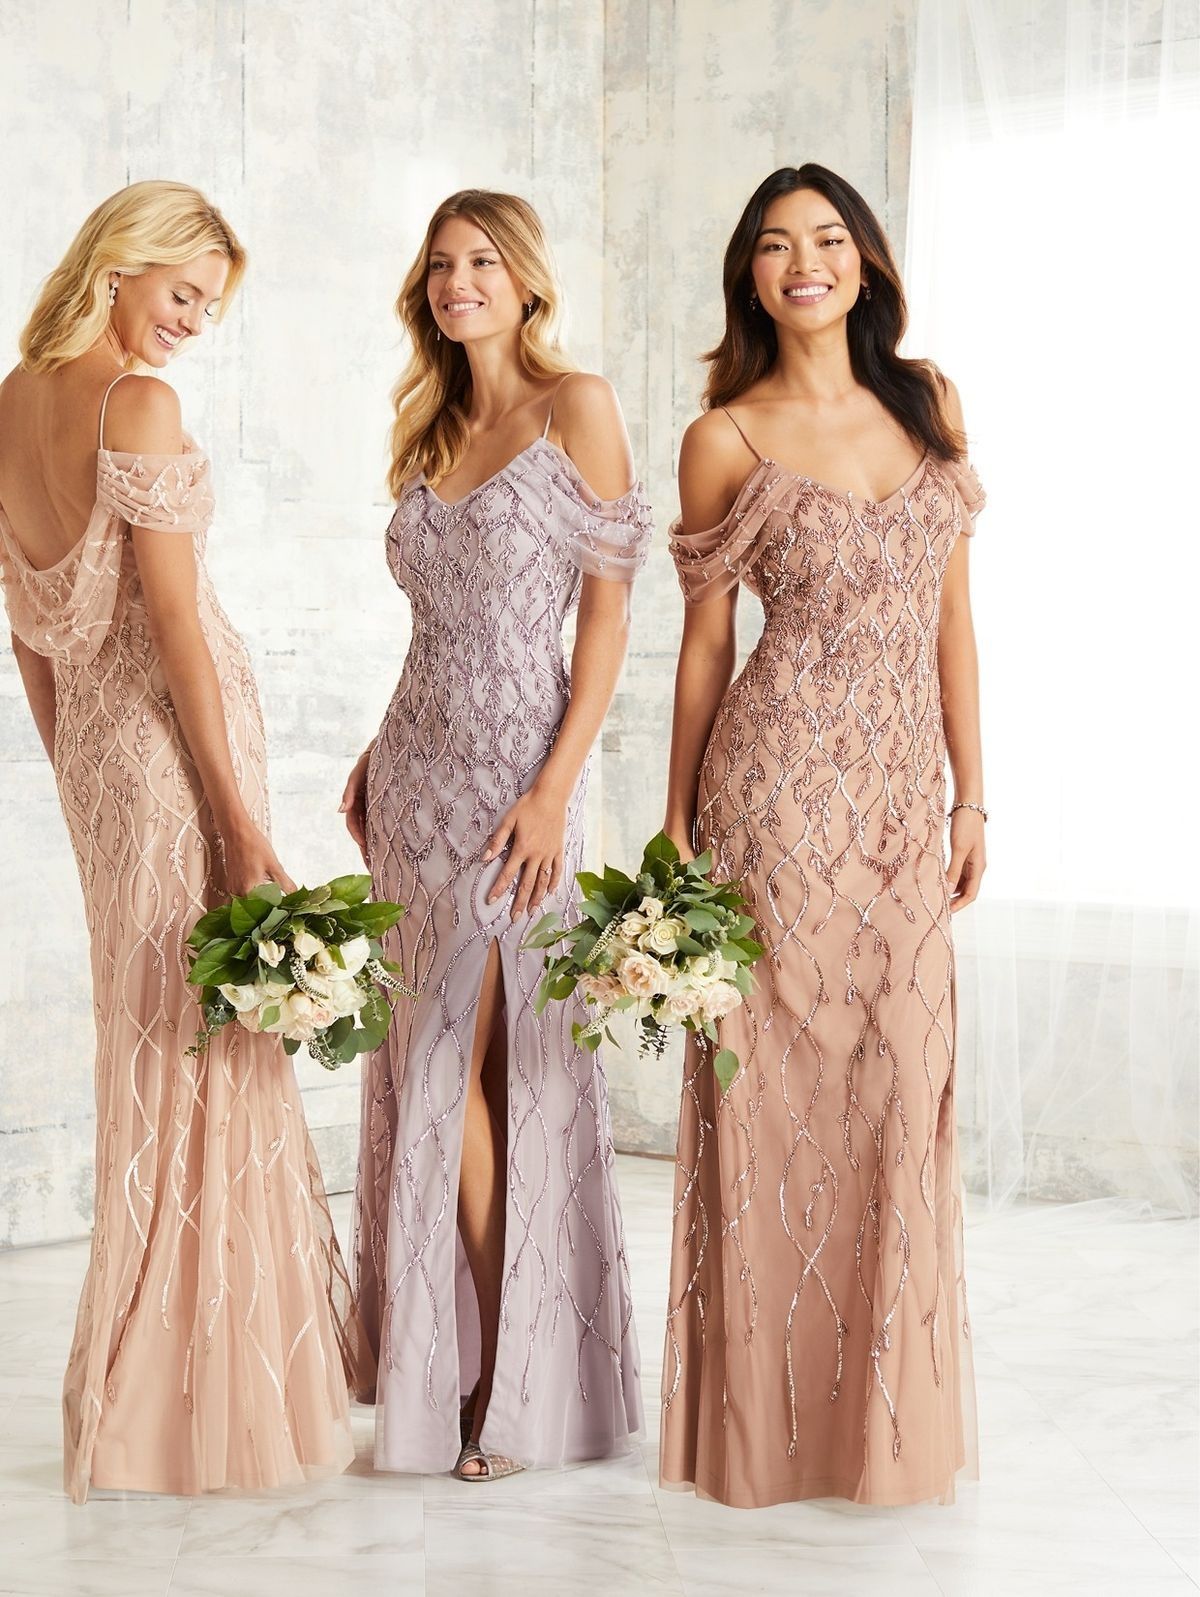 16 Rose Gold Bridesmaid Dresses for Any Wedding